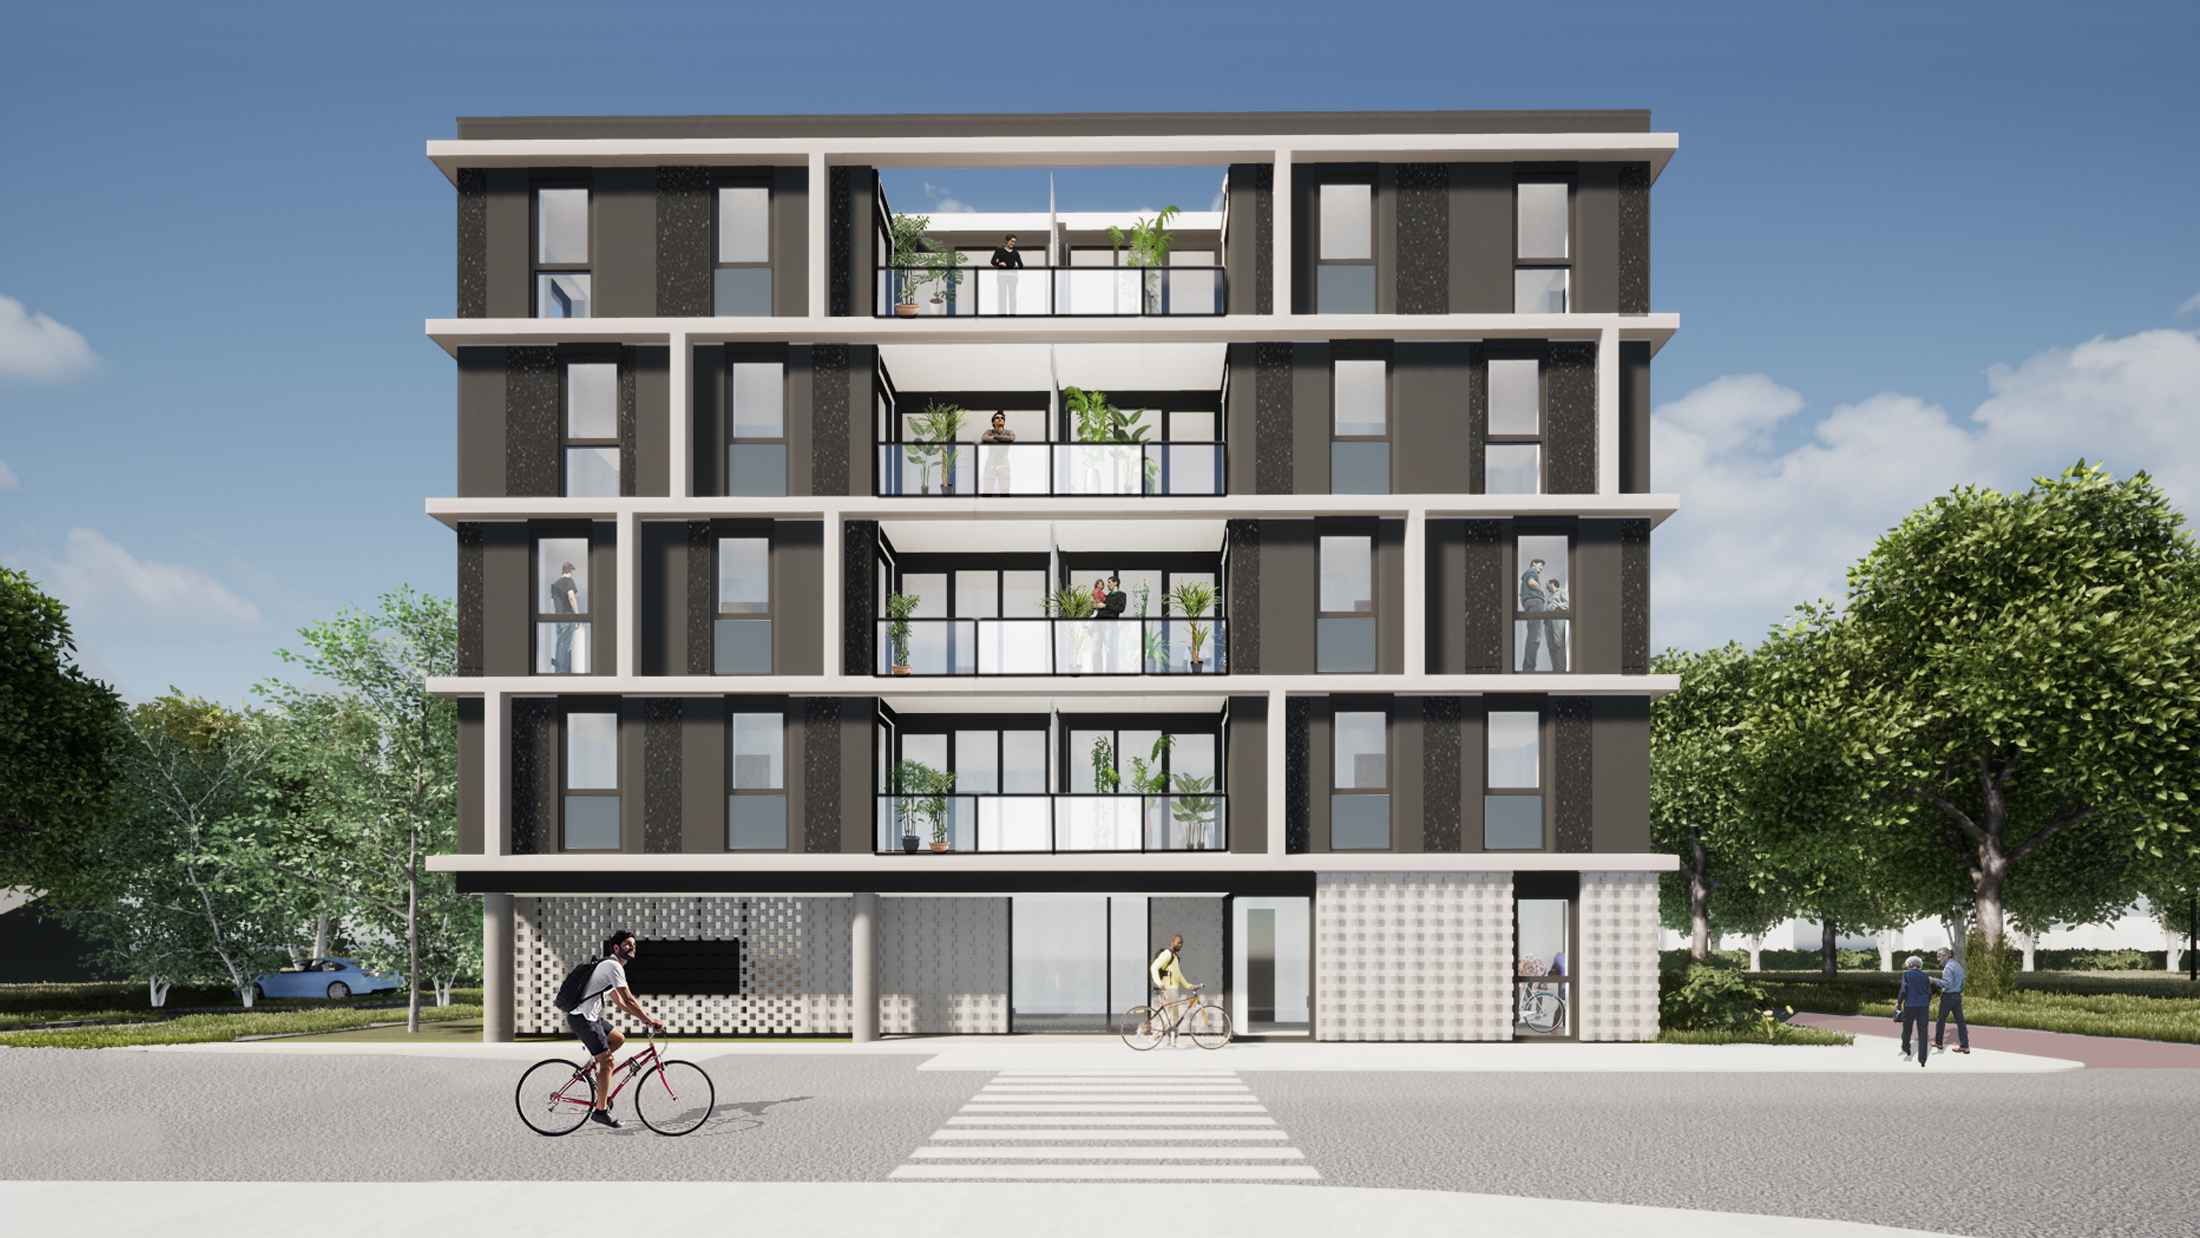 De Meker is a new residential building with 32 apartments in the social housing sector. It will be the last constructed block in the urban district Veerse Poort in Middelburg, and it is located on the border of the adjacent Nieuw Middelburg district. The unique position between the two districts adds to the spatial urban quality of the apartment block.